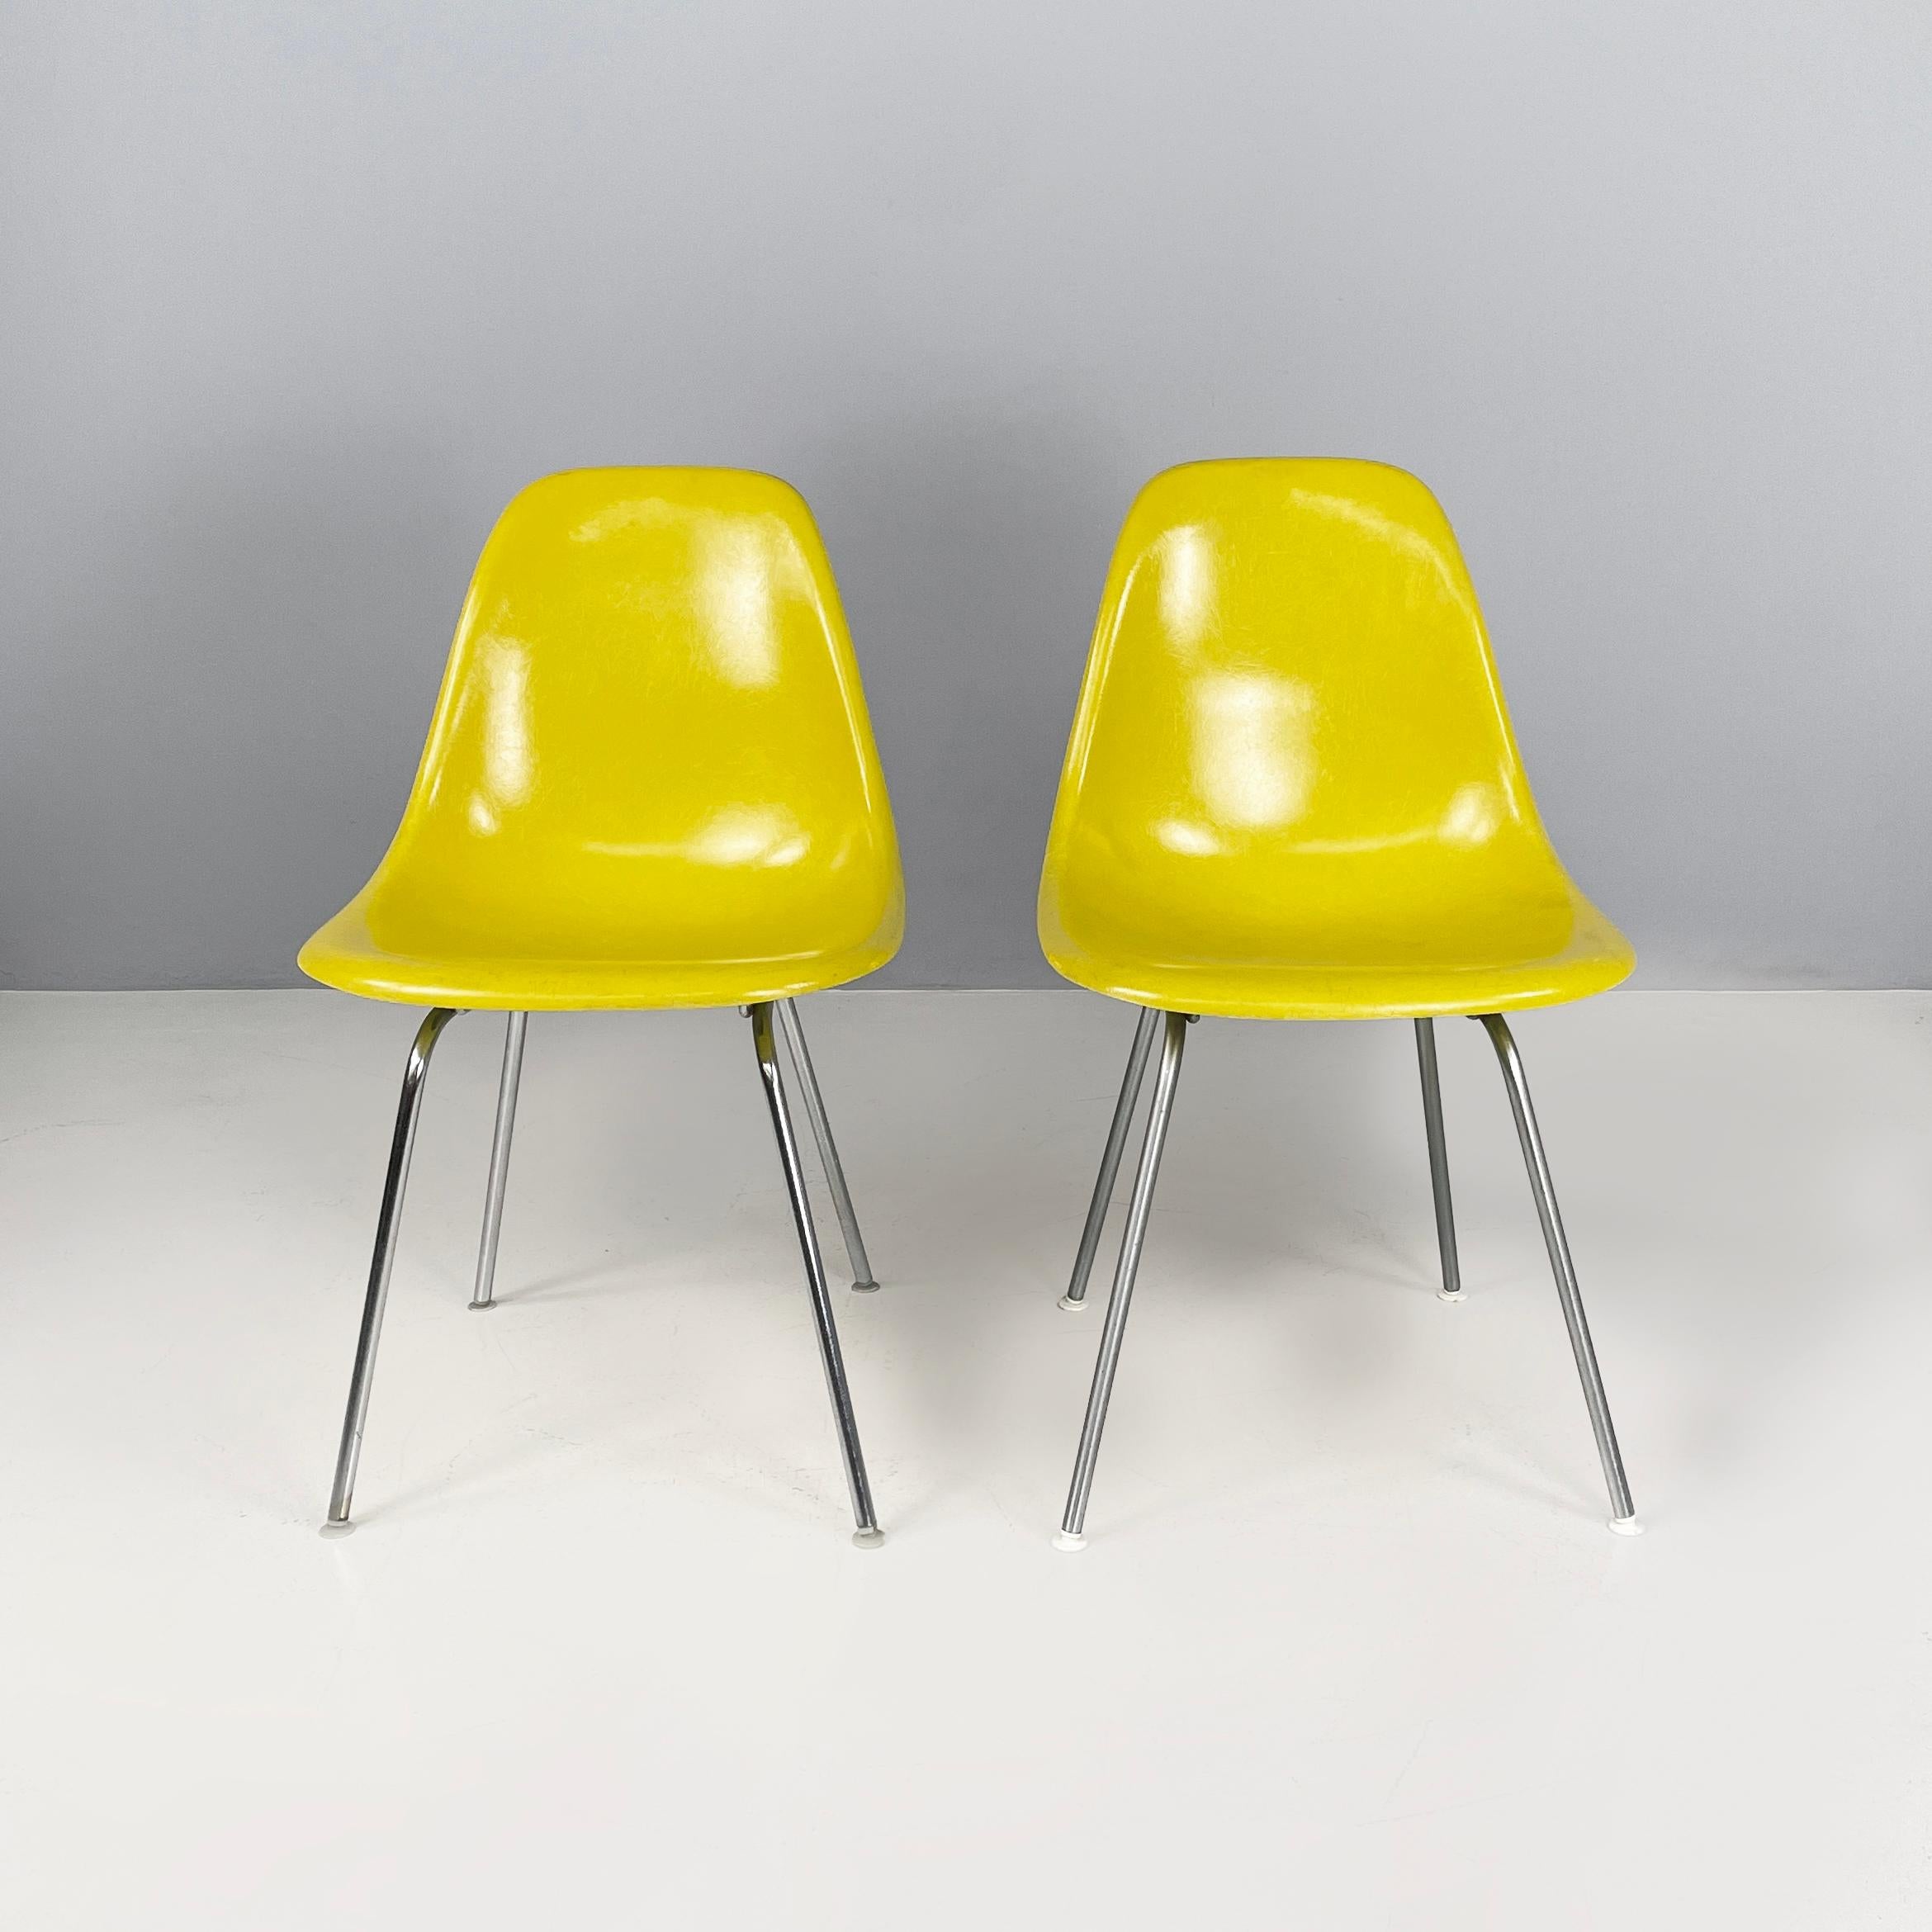 American modern Yellow Shell Chairs by Charles and Ray Eames for Herman Miller, 1970s
Pair of chairs belonging to the Shell Chairs series with curved monocoque seat and back in yellow fibreglass. The legs are made of metal rod. Round plastic feet: